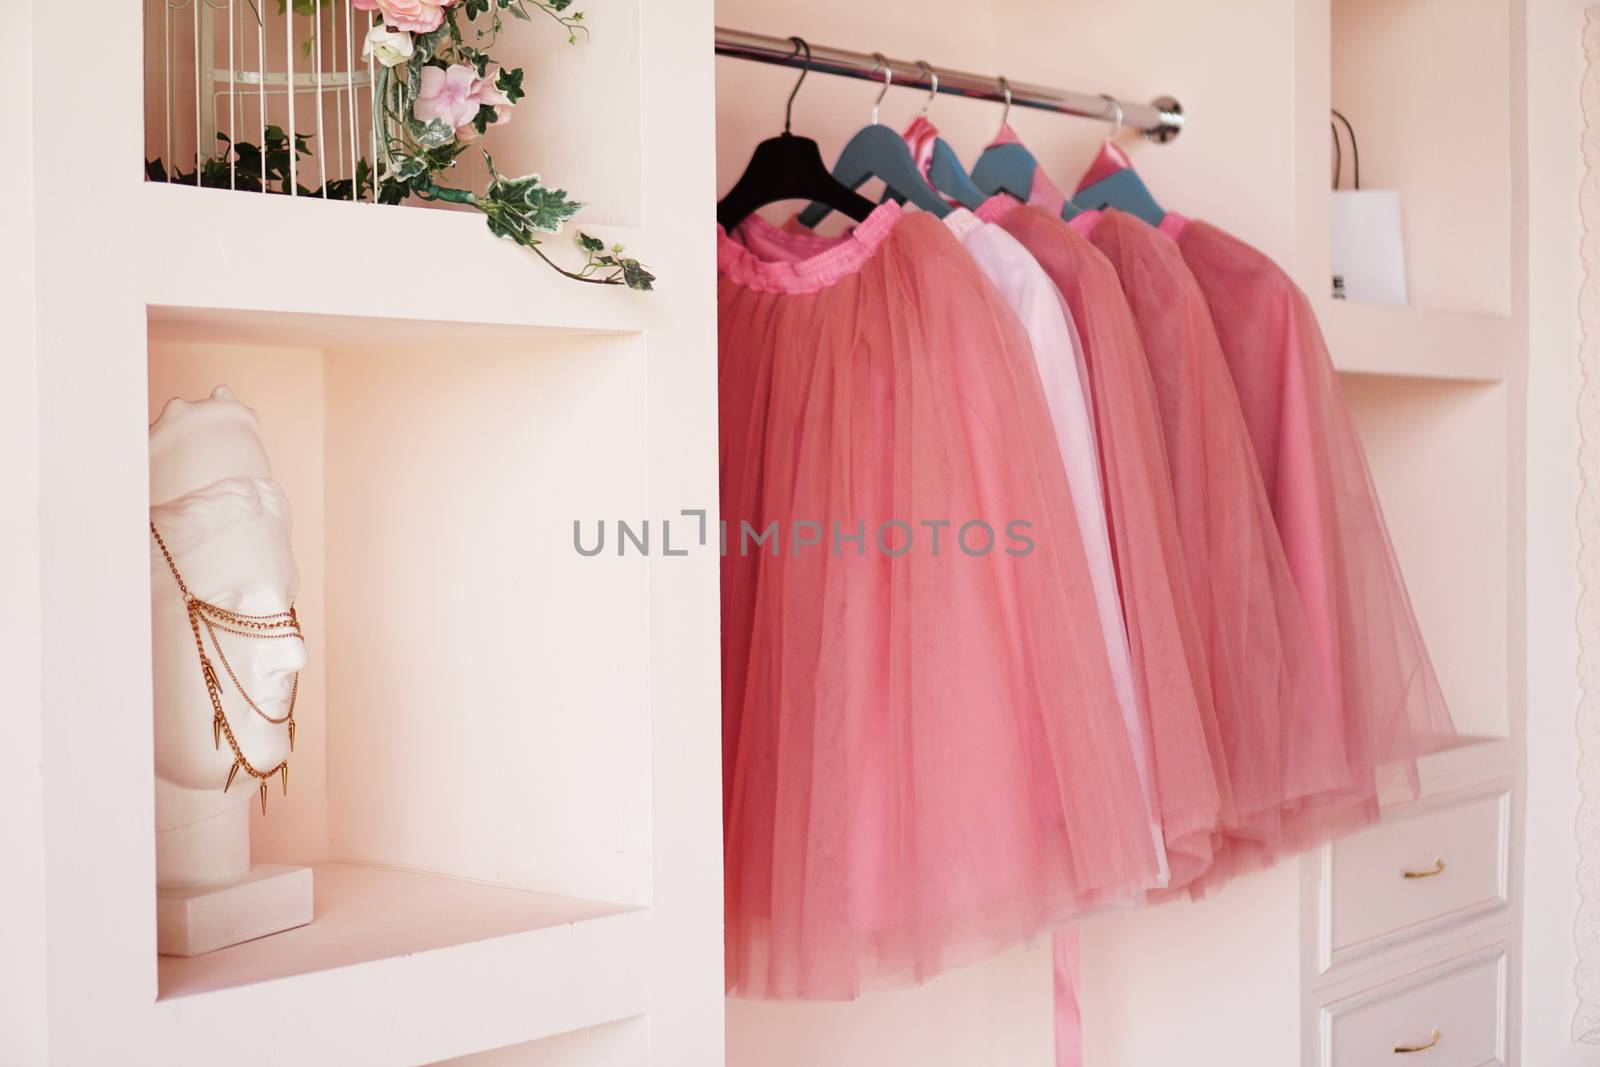 Dressing closet with pink clothes is arranged on hangers. The wardrobe is full of pink skirts, accessories on the shelves.